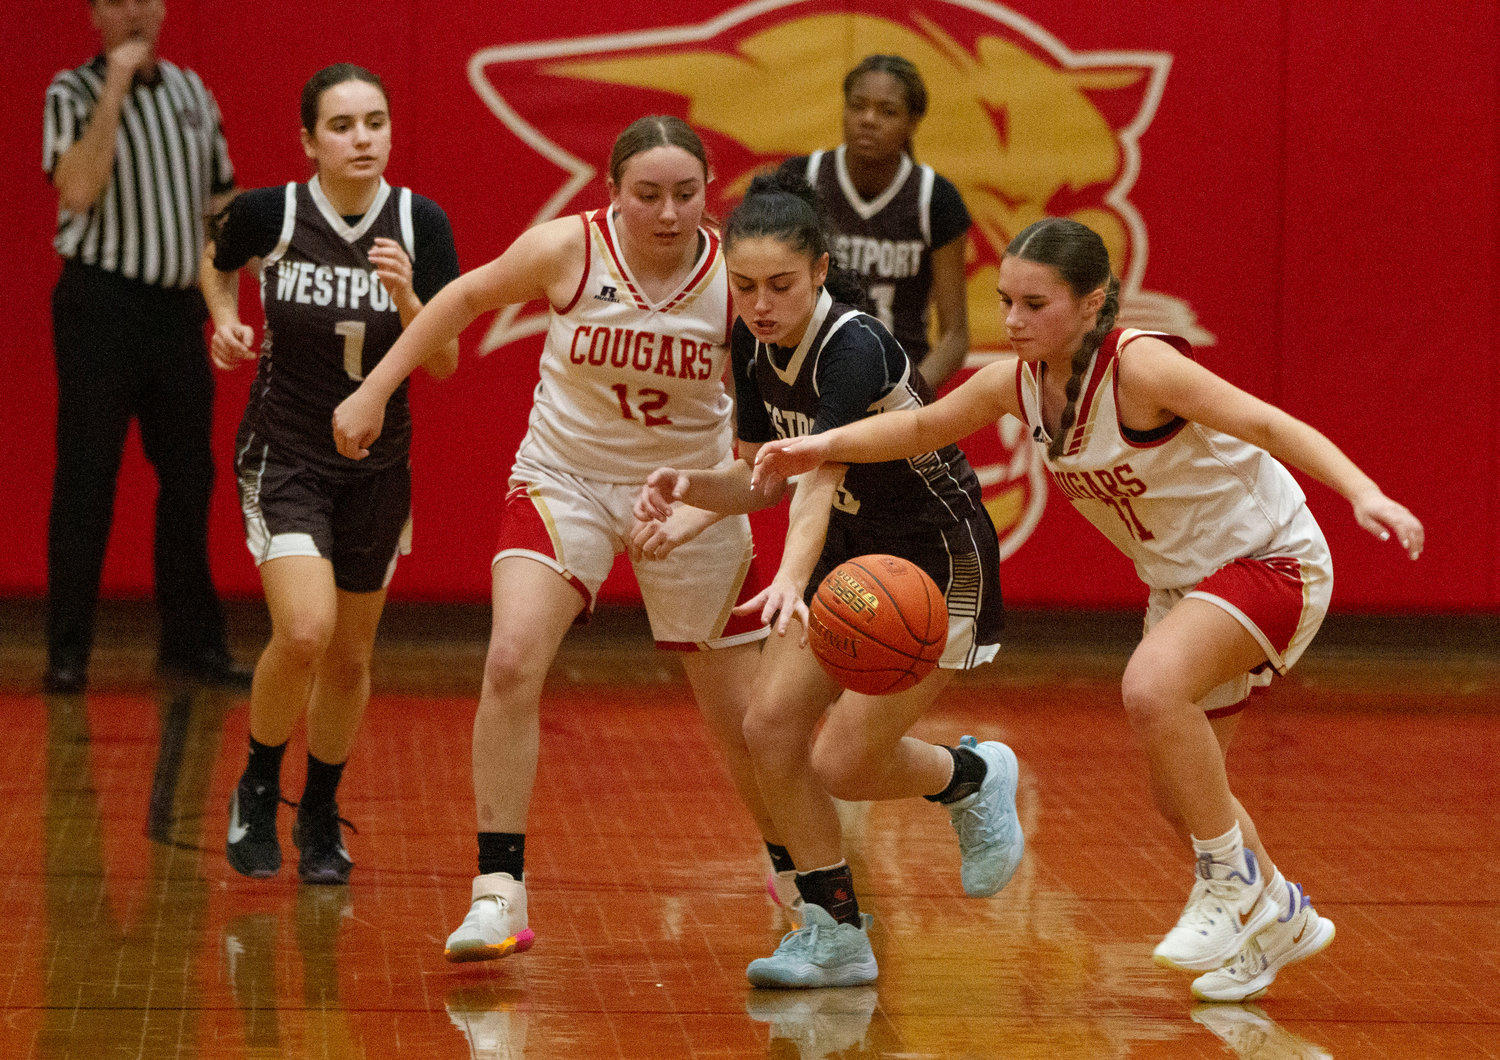 Korynne Holden makes a steal during the Wildcats' game at Bishop Connolly on Wednesday afternoon.